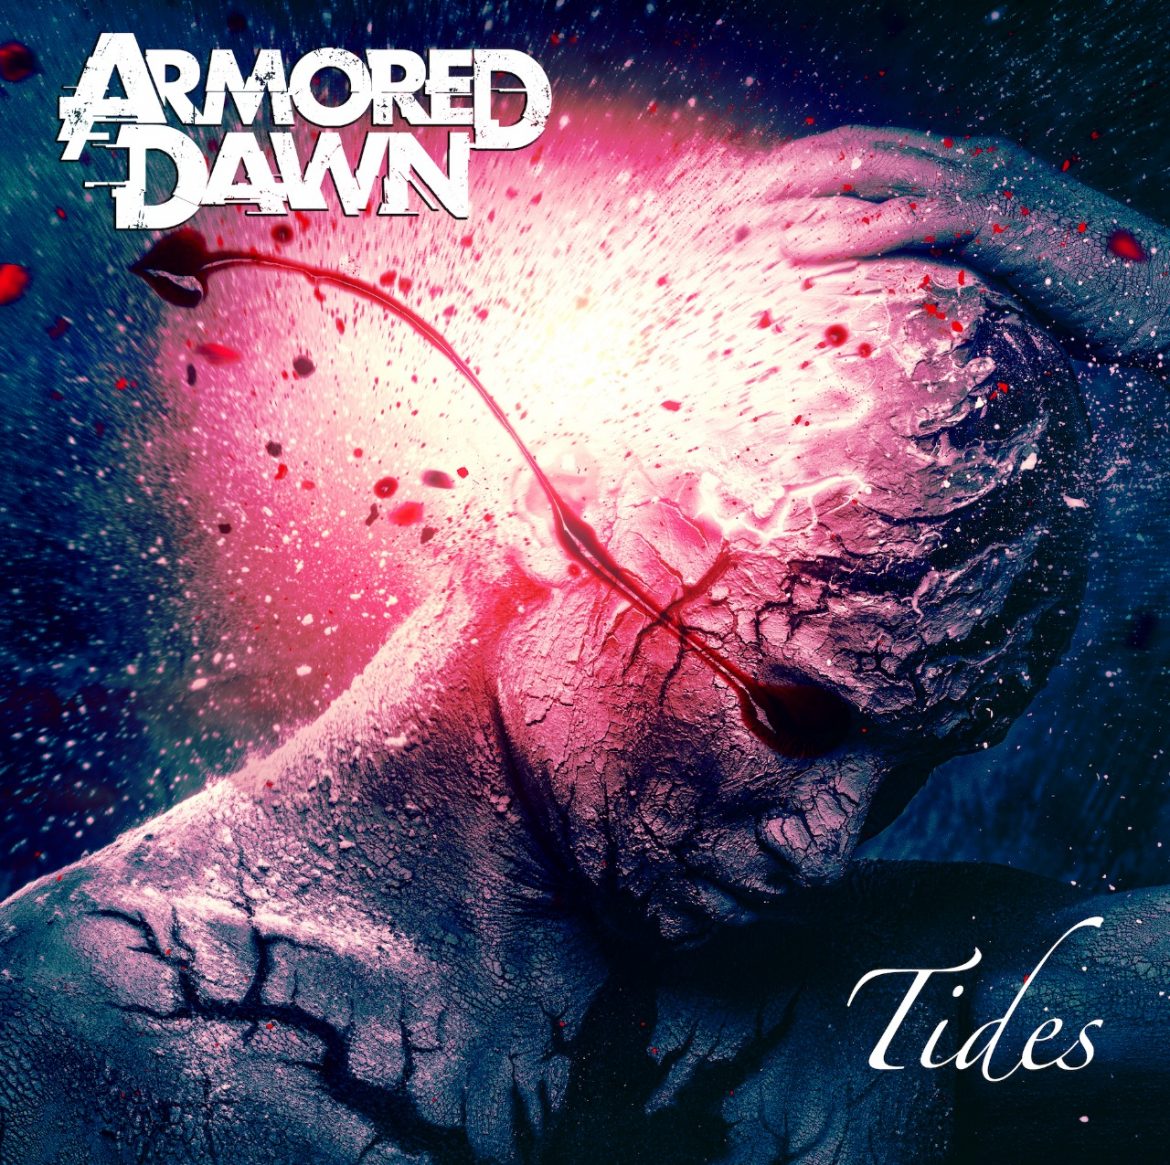 The new single ‘Tides’ from ‘Armored Dawn’ with it’s infectious metal power reaches South Africa on the playlist now.